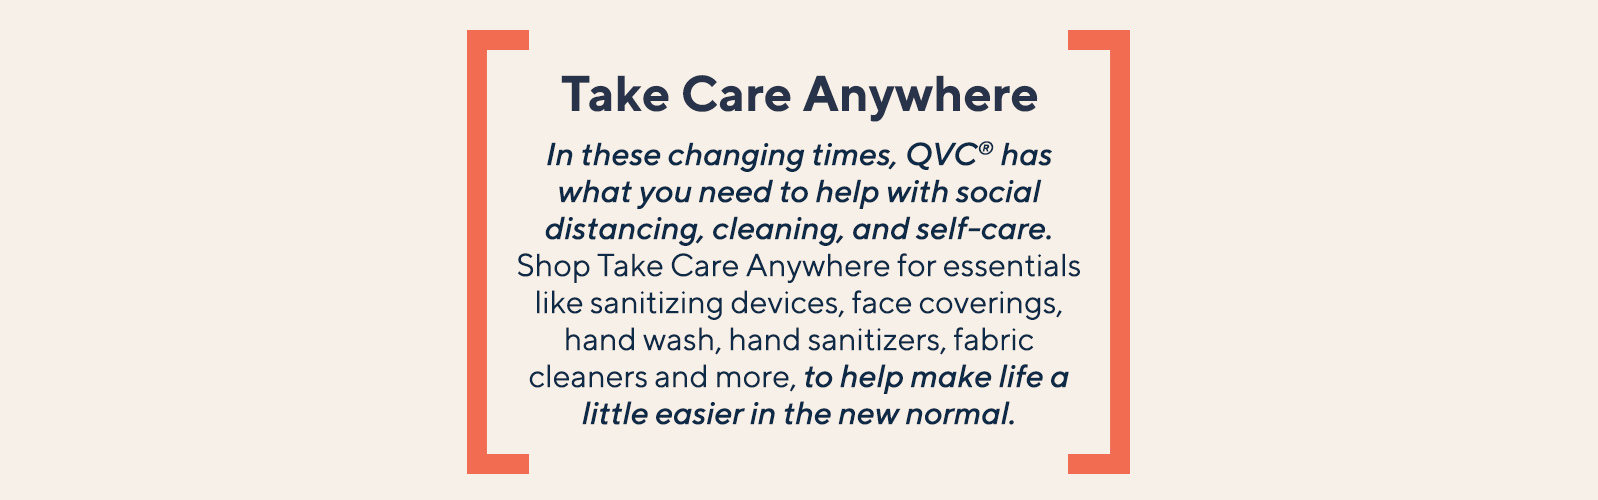 Take Care Anywhere.  In these changing times, QVC® has what you need to help with social distancing, cleaning & self-care. Shop Take Care Anywhere for essentials like sanitizing devices, face coverings, hand wash, hand sanitizers, fabric cleaners and more, to help make life a little easier in the new normal.